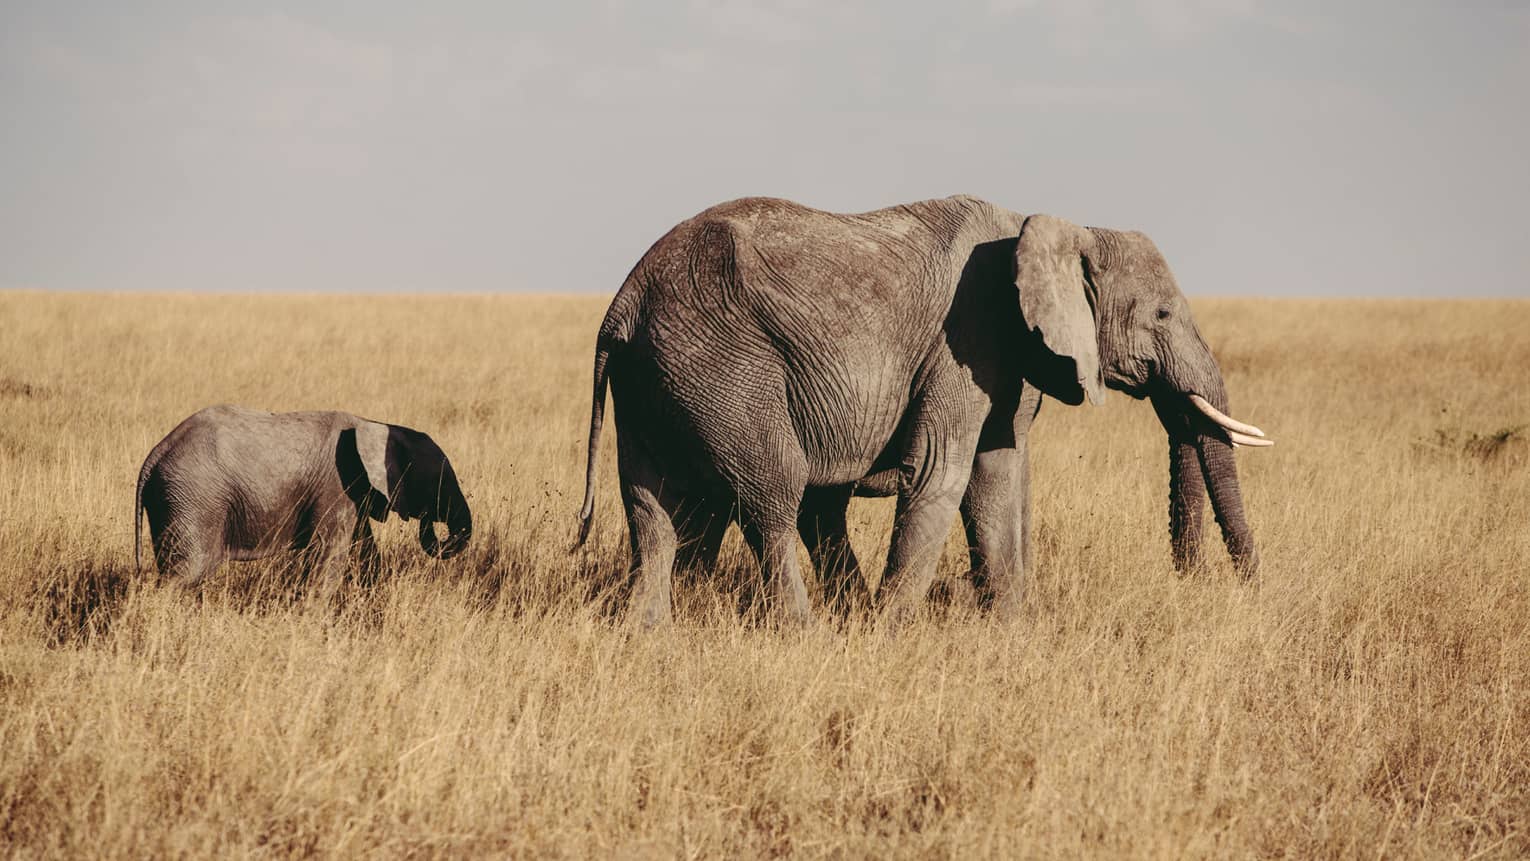 Elephant and baby walk through grass in field